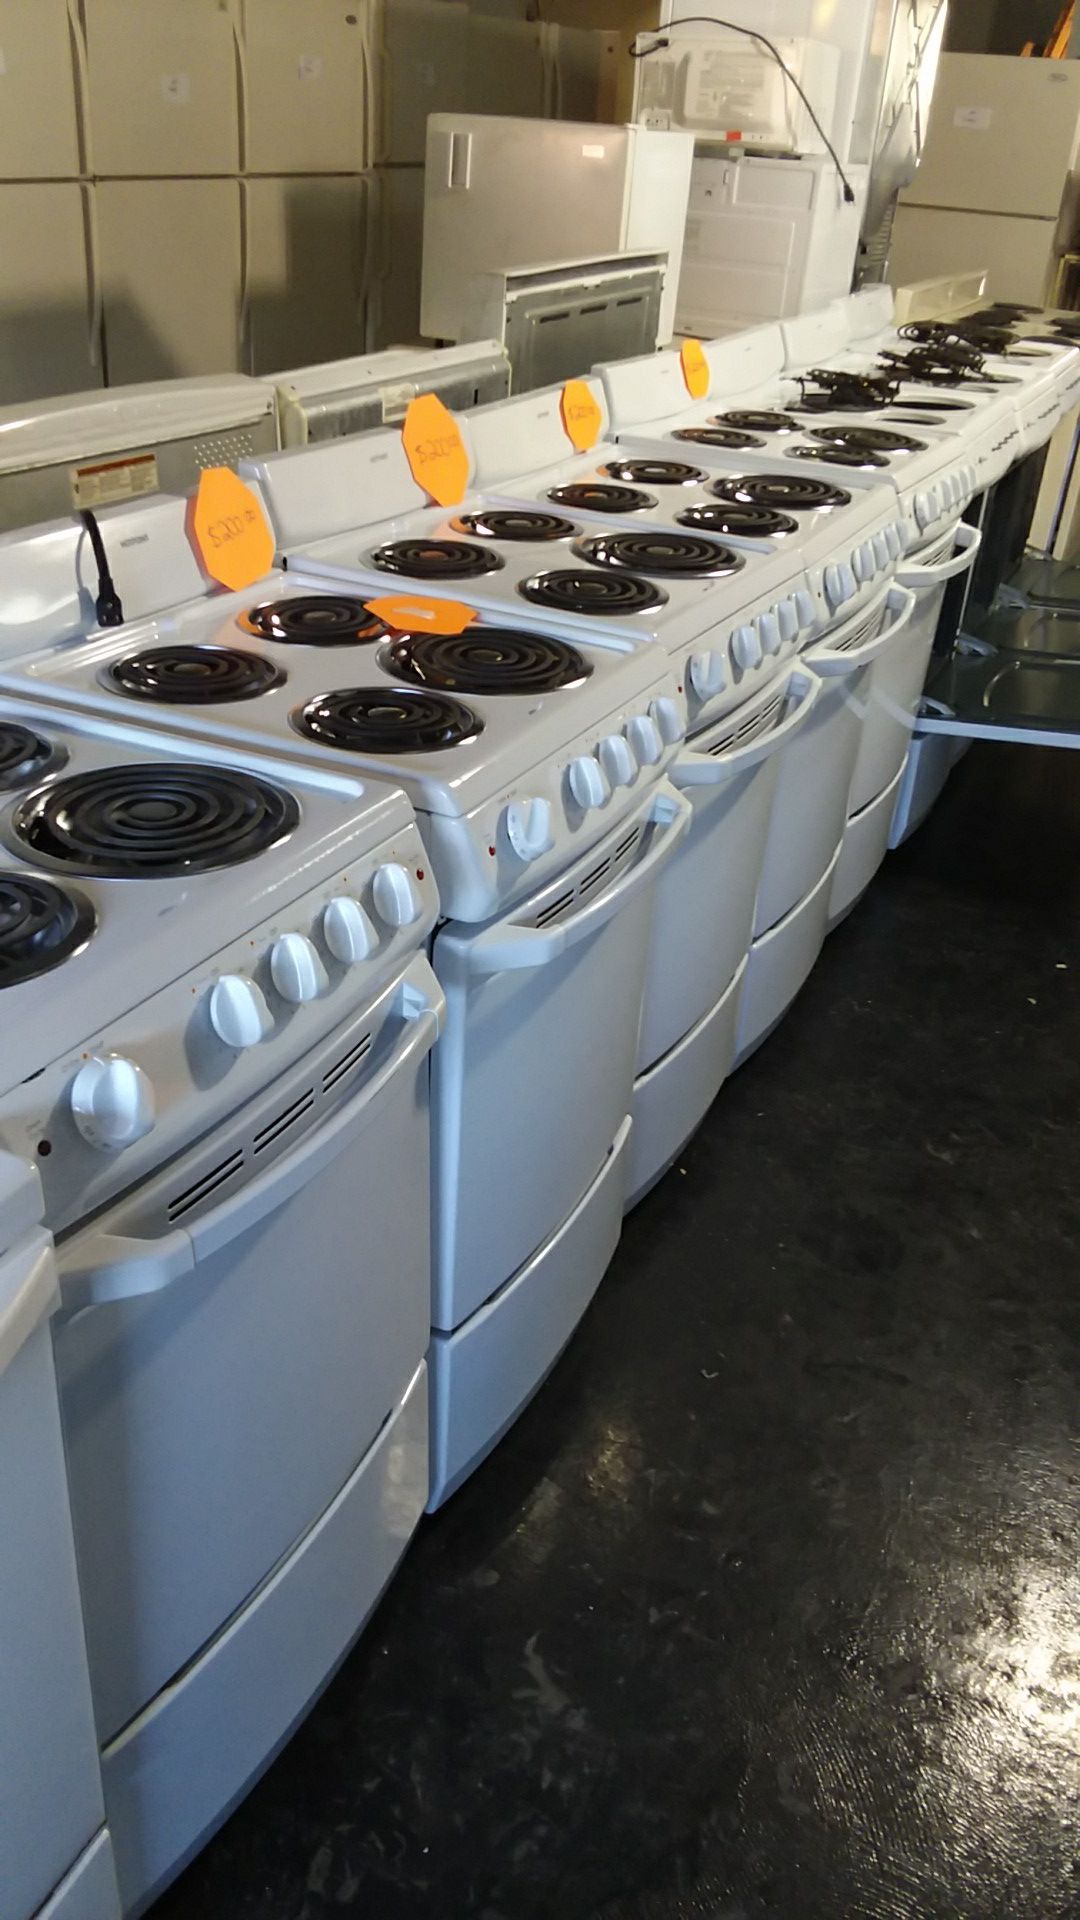 20 inch apartment size stove 4 Day Sale 13th Thru the 16th